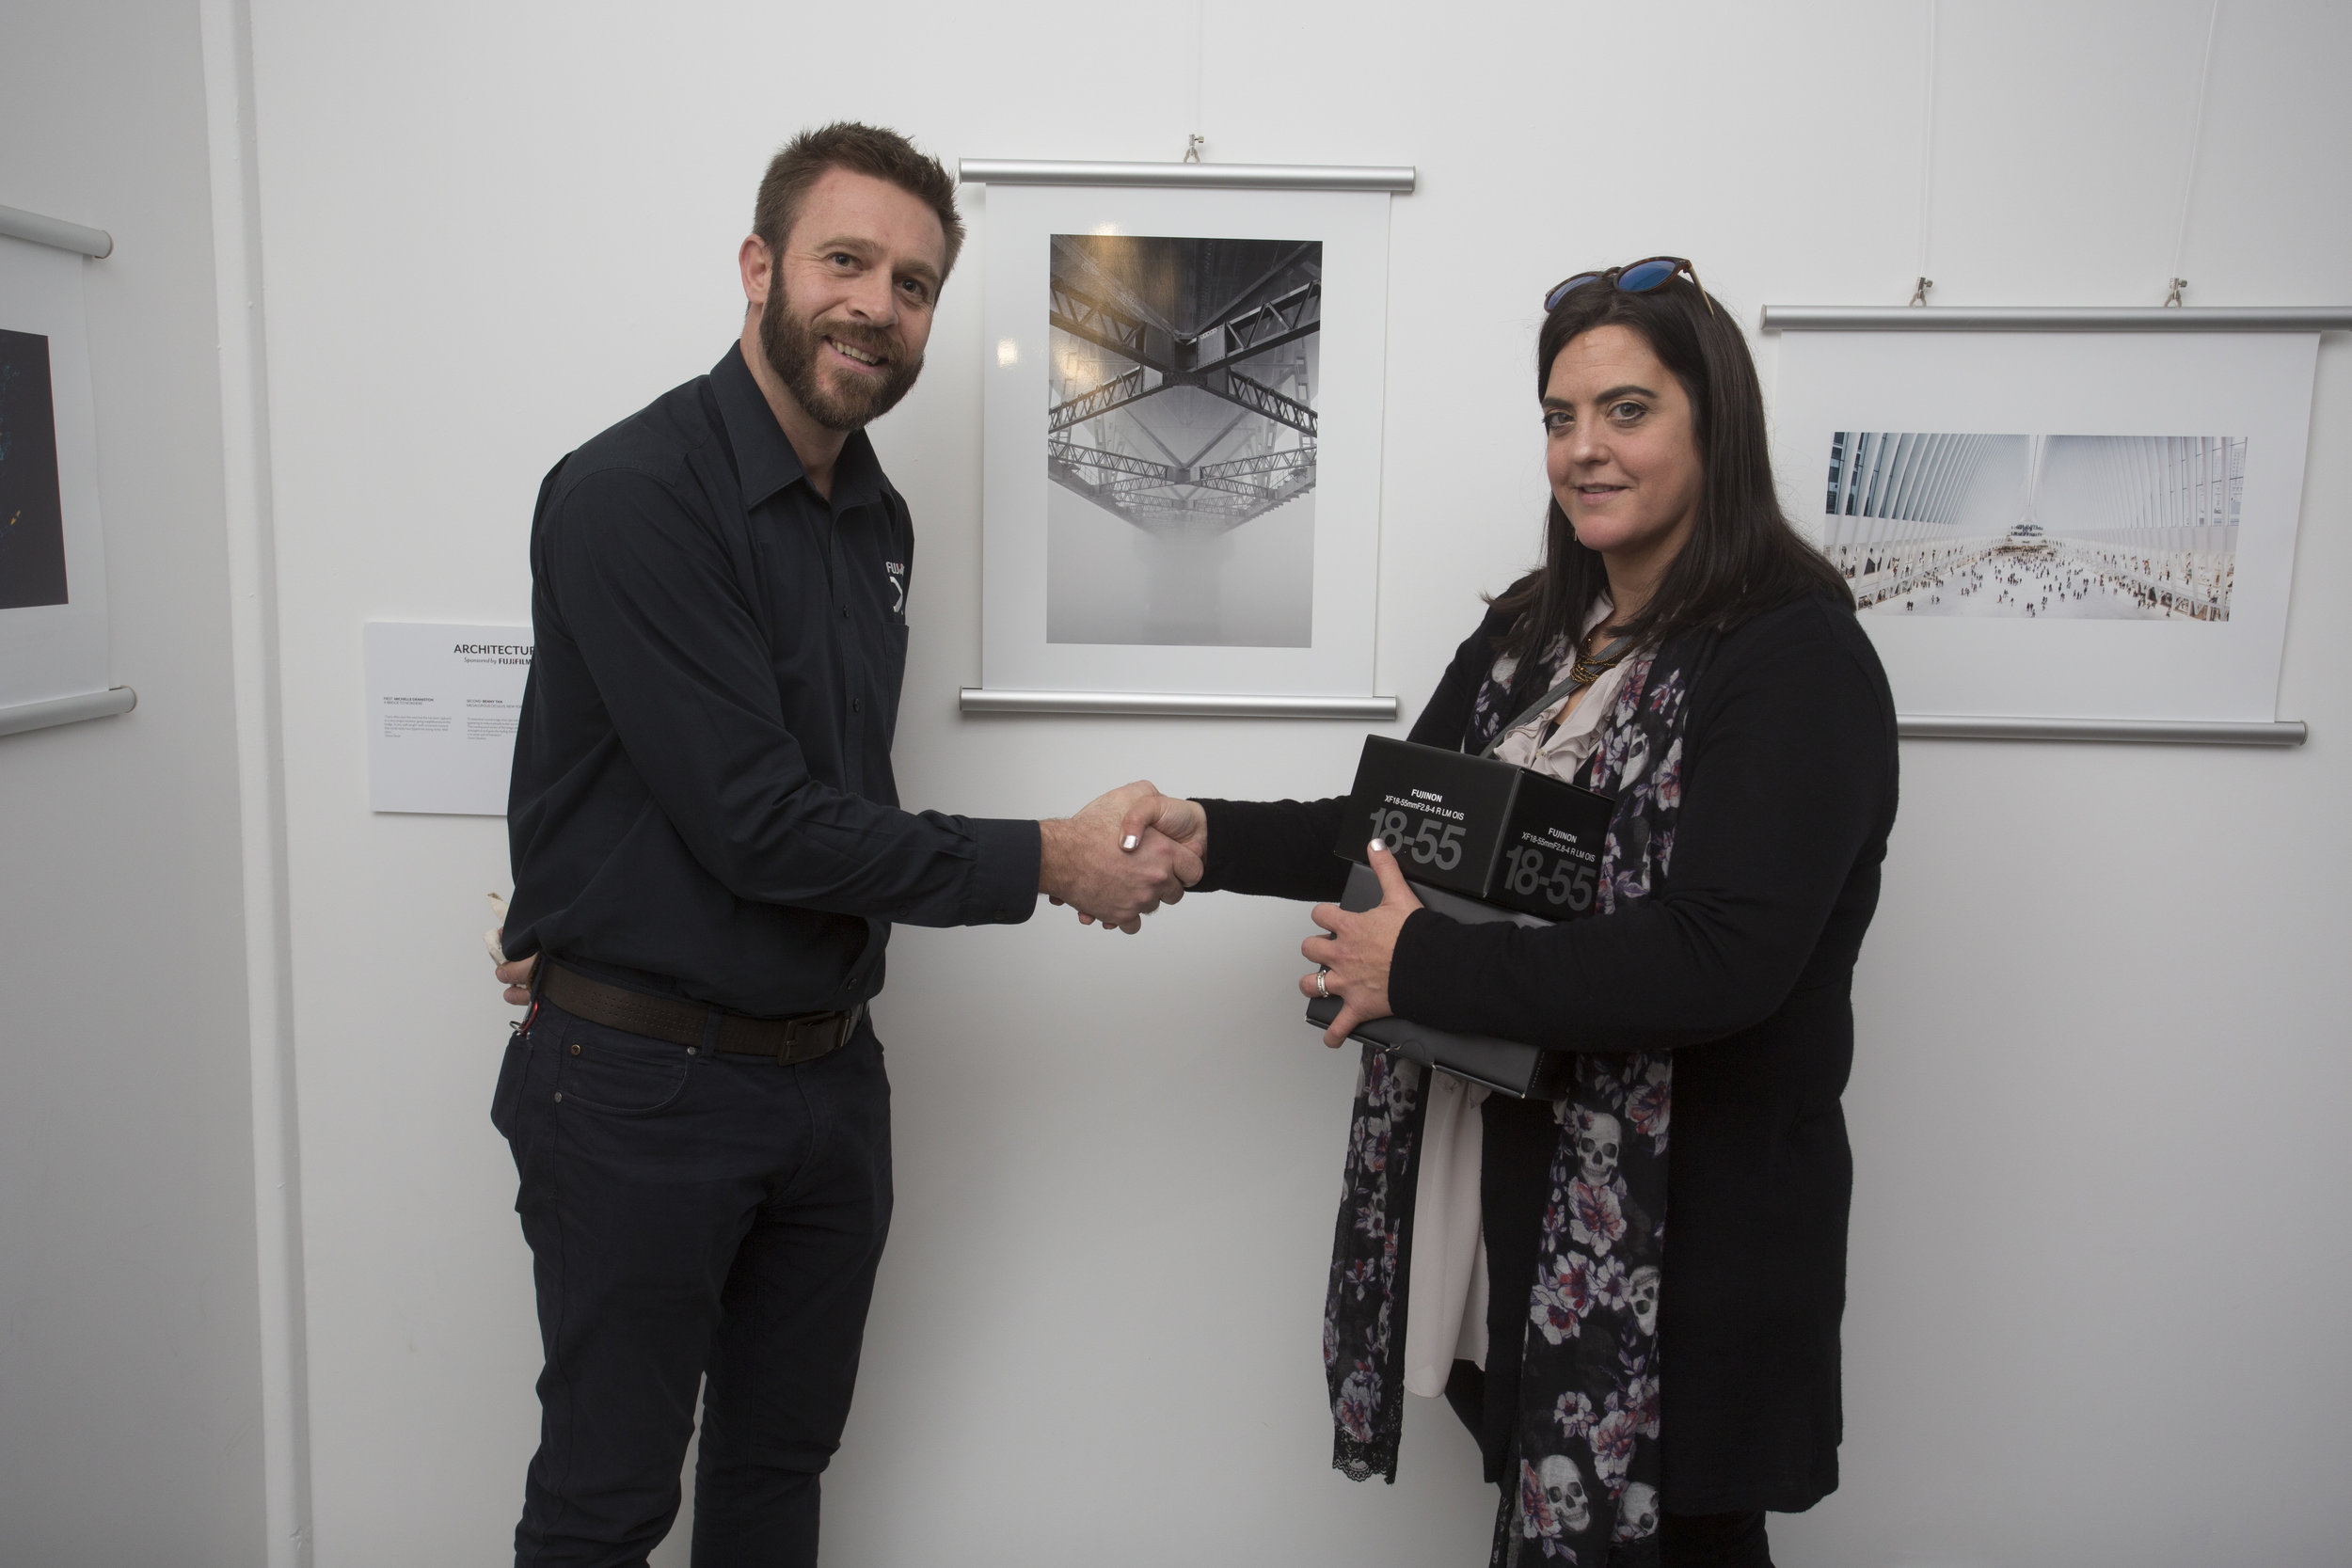  Ira Swales from Fujifilm congratulates Michelle Denniston, who achieved first place in Architecture 